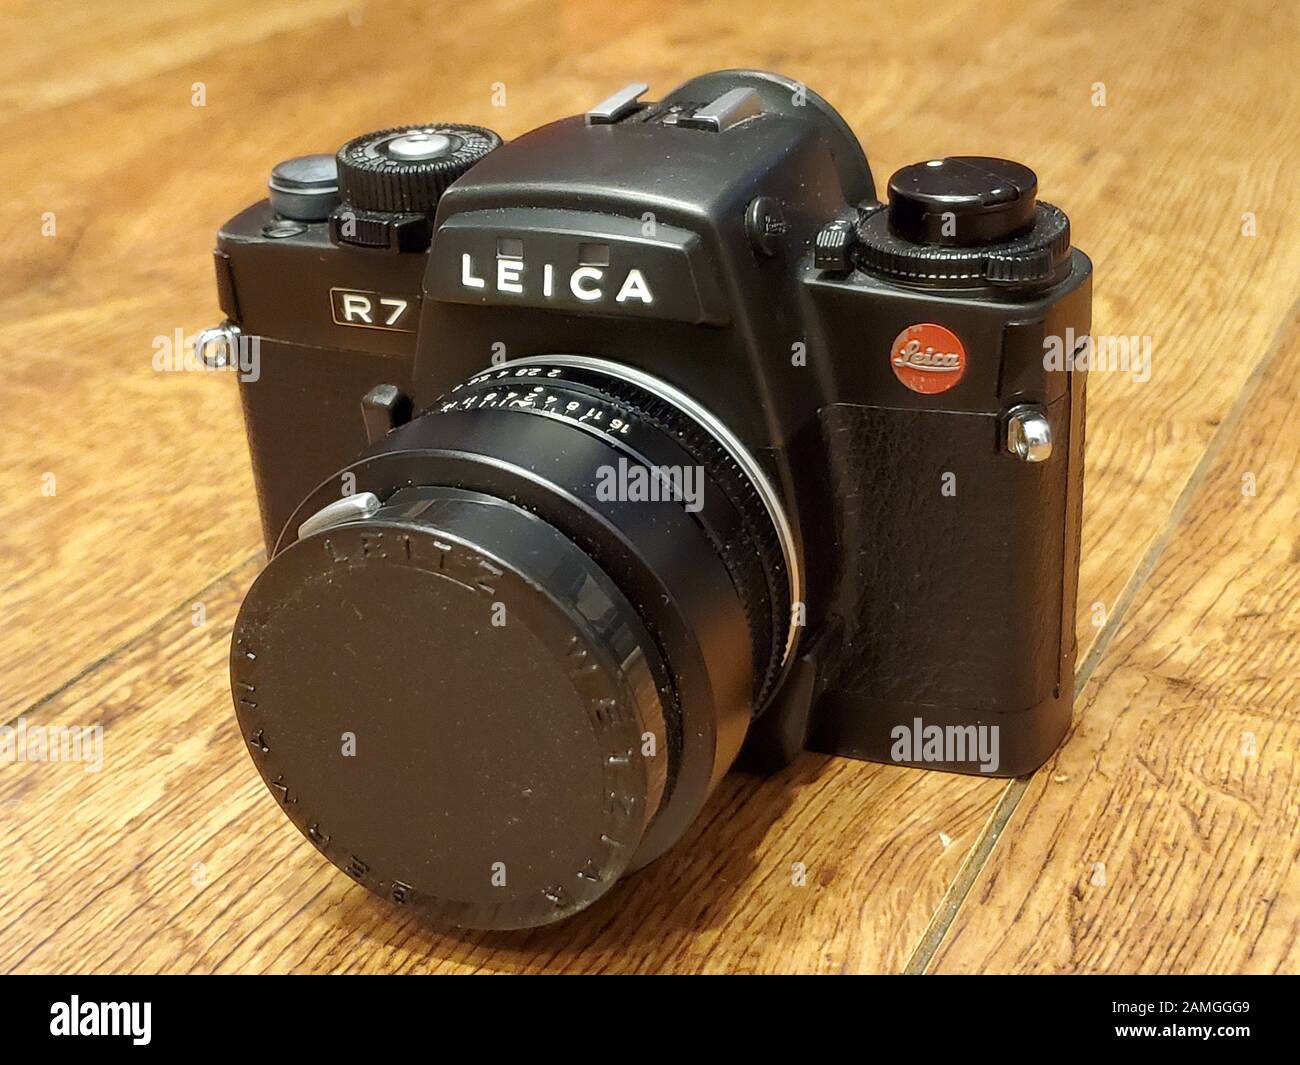 Close-up of Leica R7 film camera with 50mm prime lens on light wooden surface, November 27, 2019. () Stock Photo